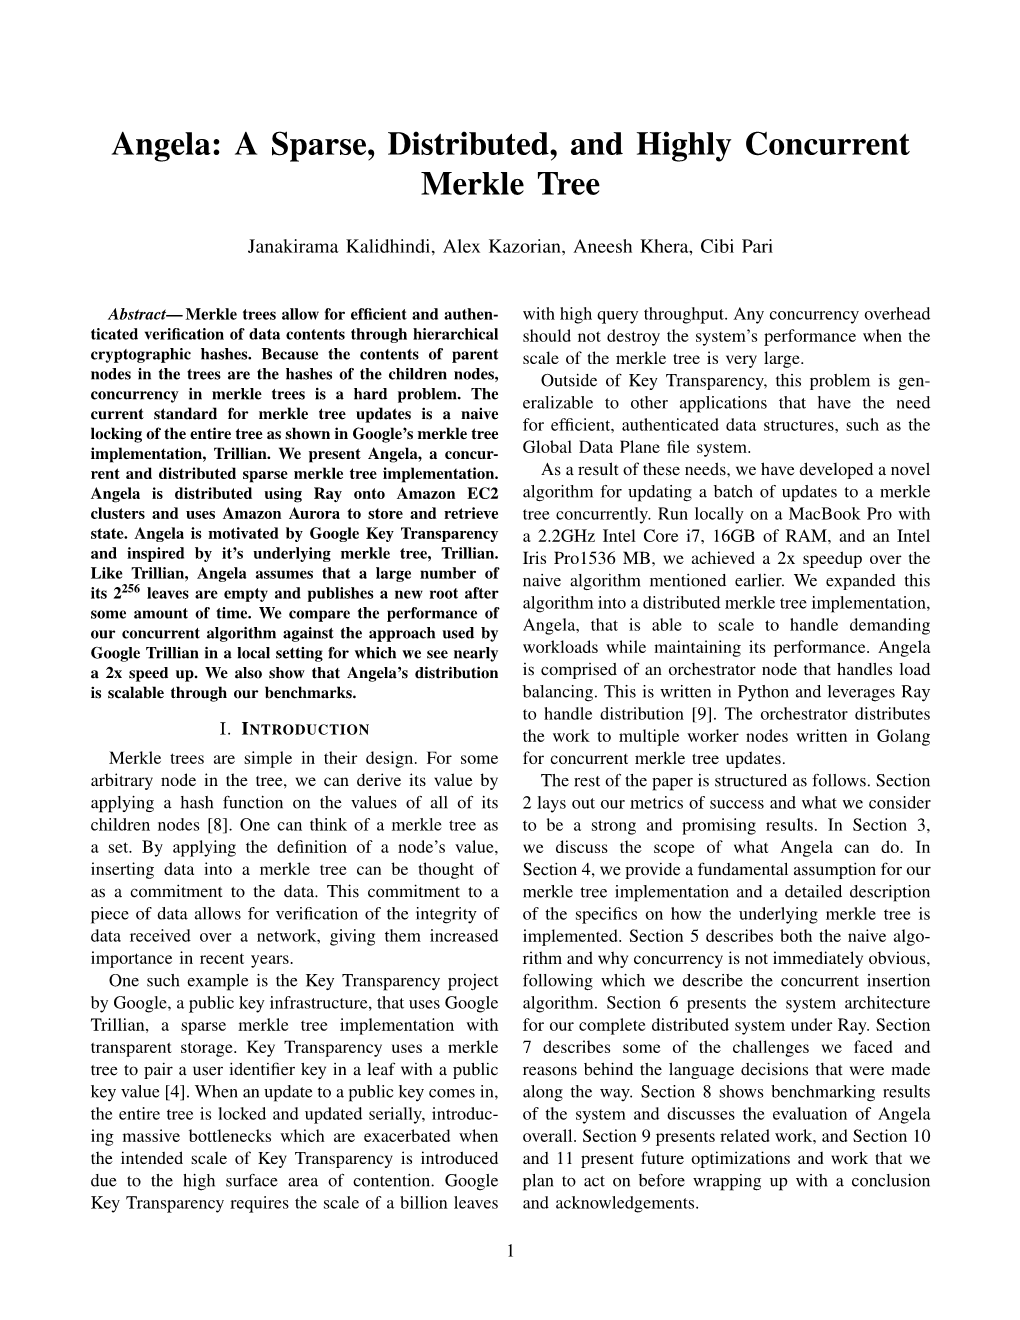 Angela: a Sparse, Distributed, and Highly Concurrent Merkle Tree